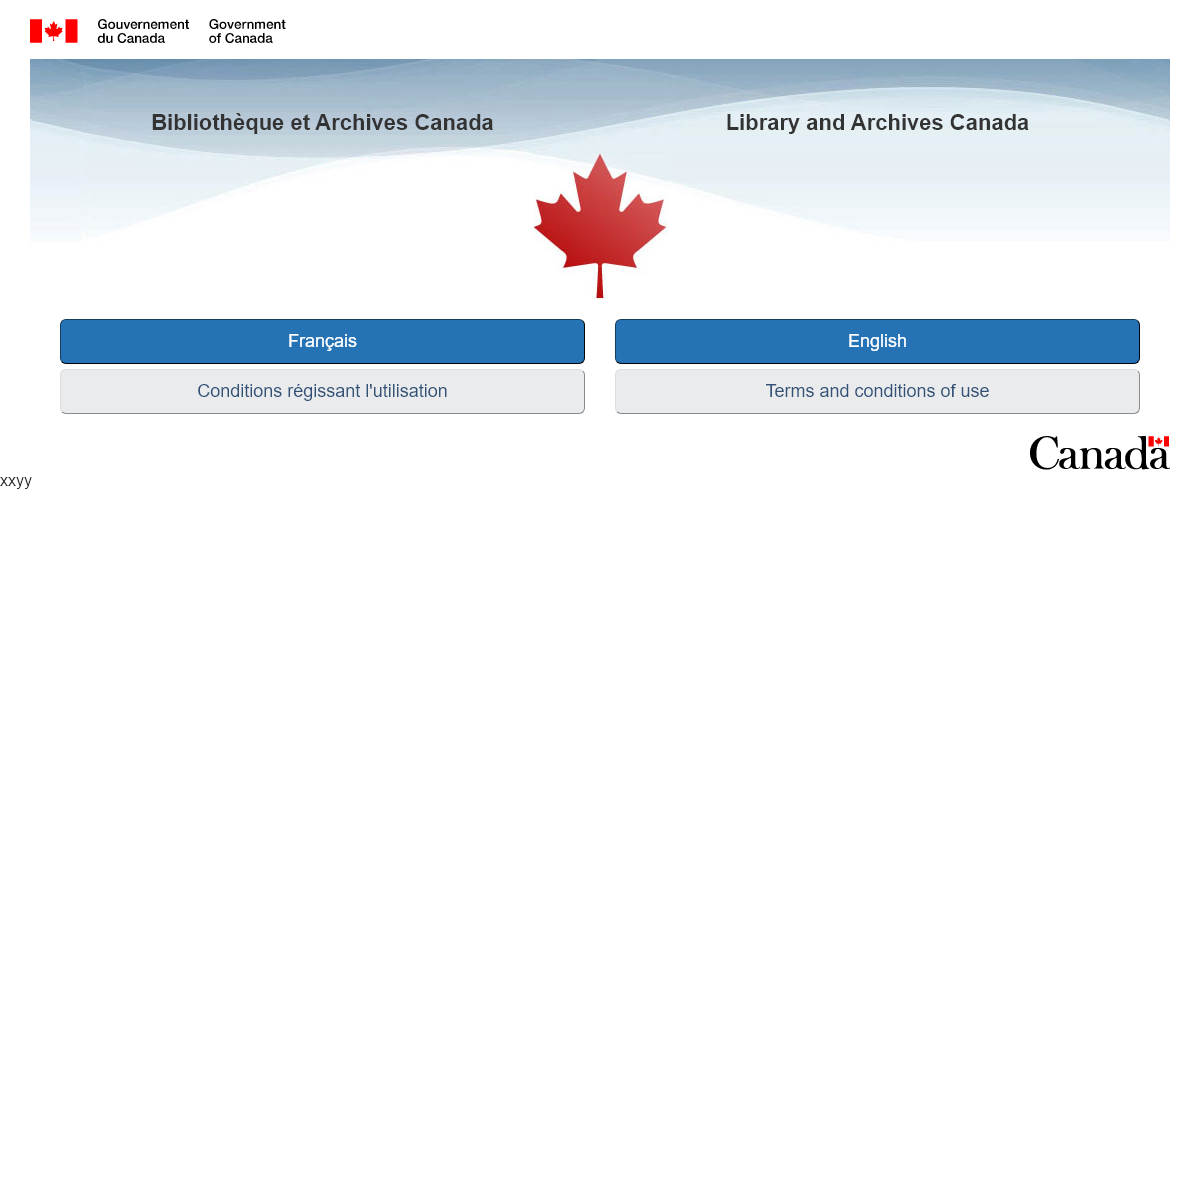 A complete backup of collectionscanada.ca